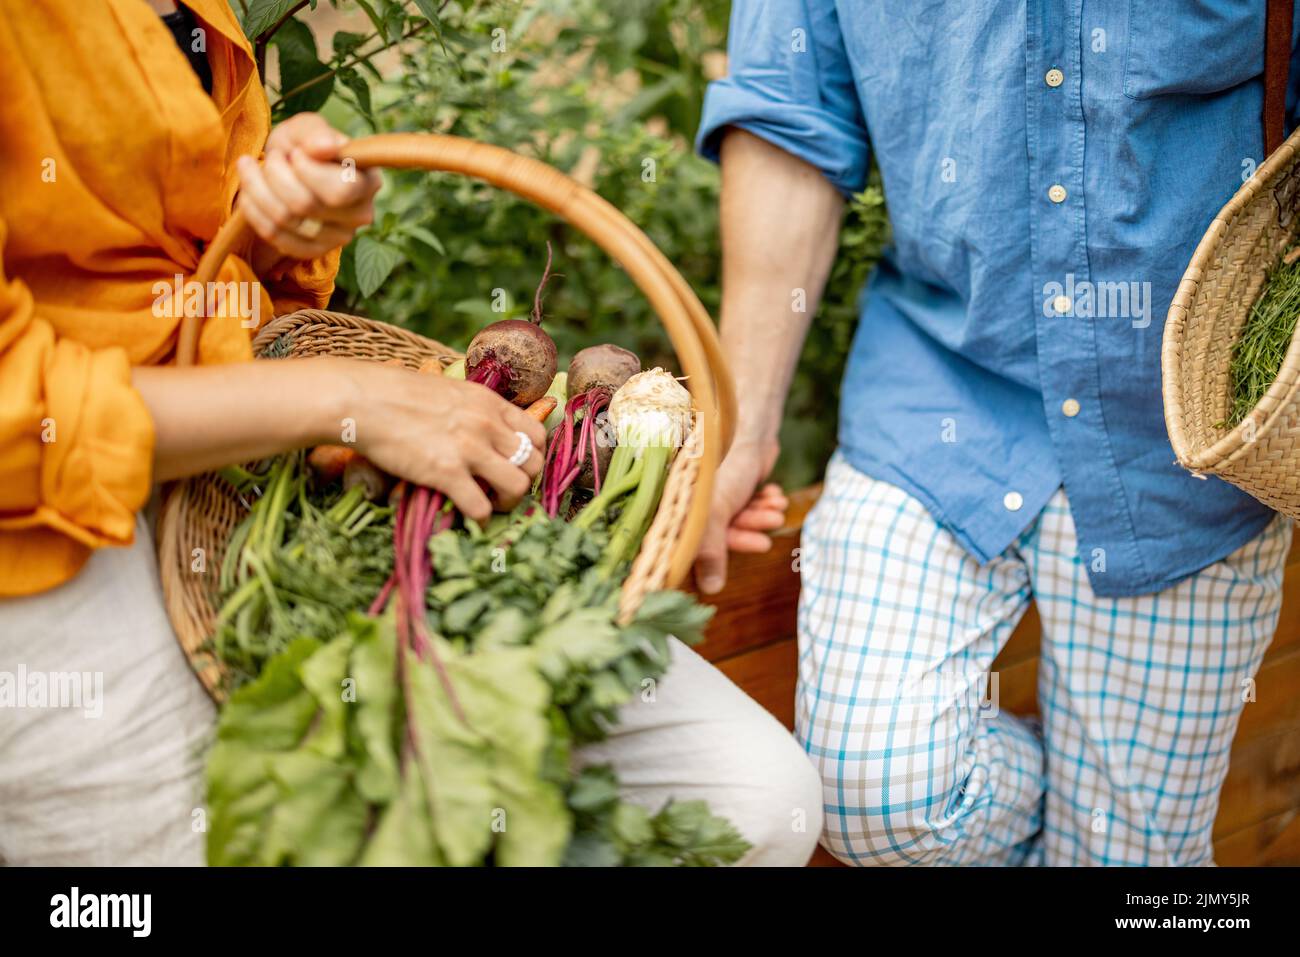 Farmers holds freshly picked beetroot in basket at garden Stock Photo